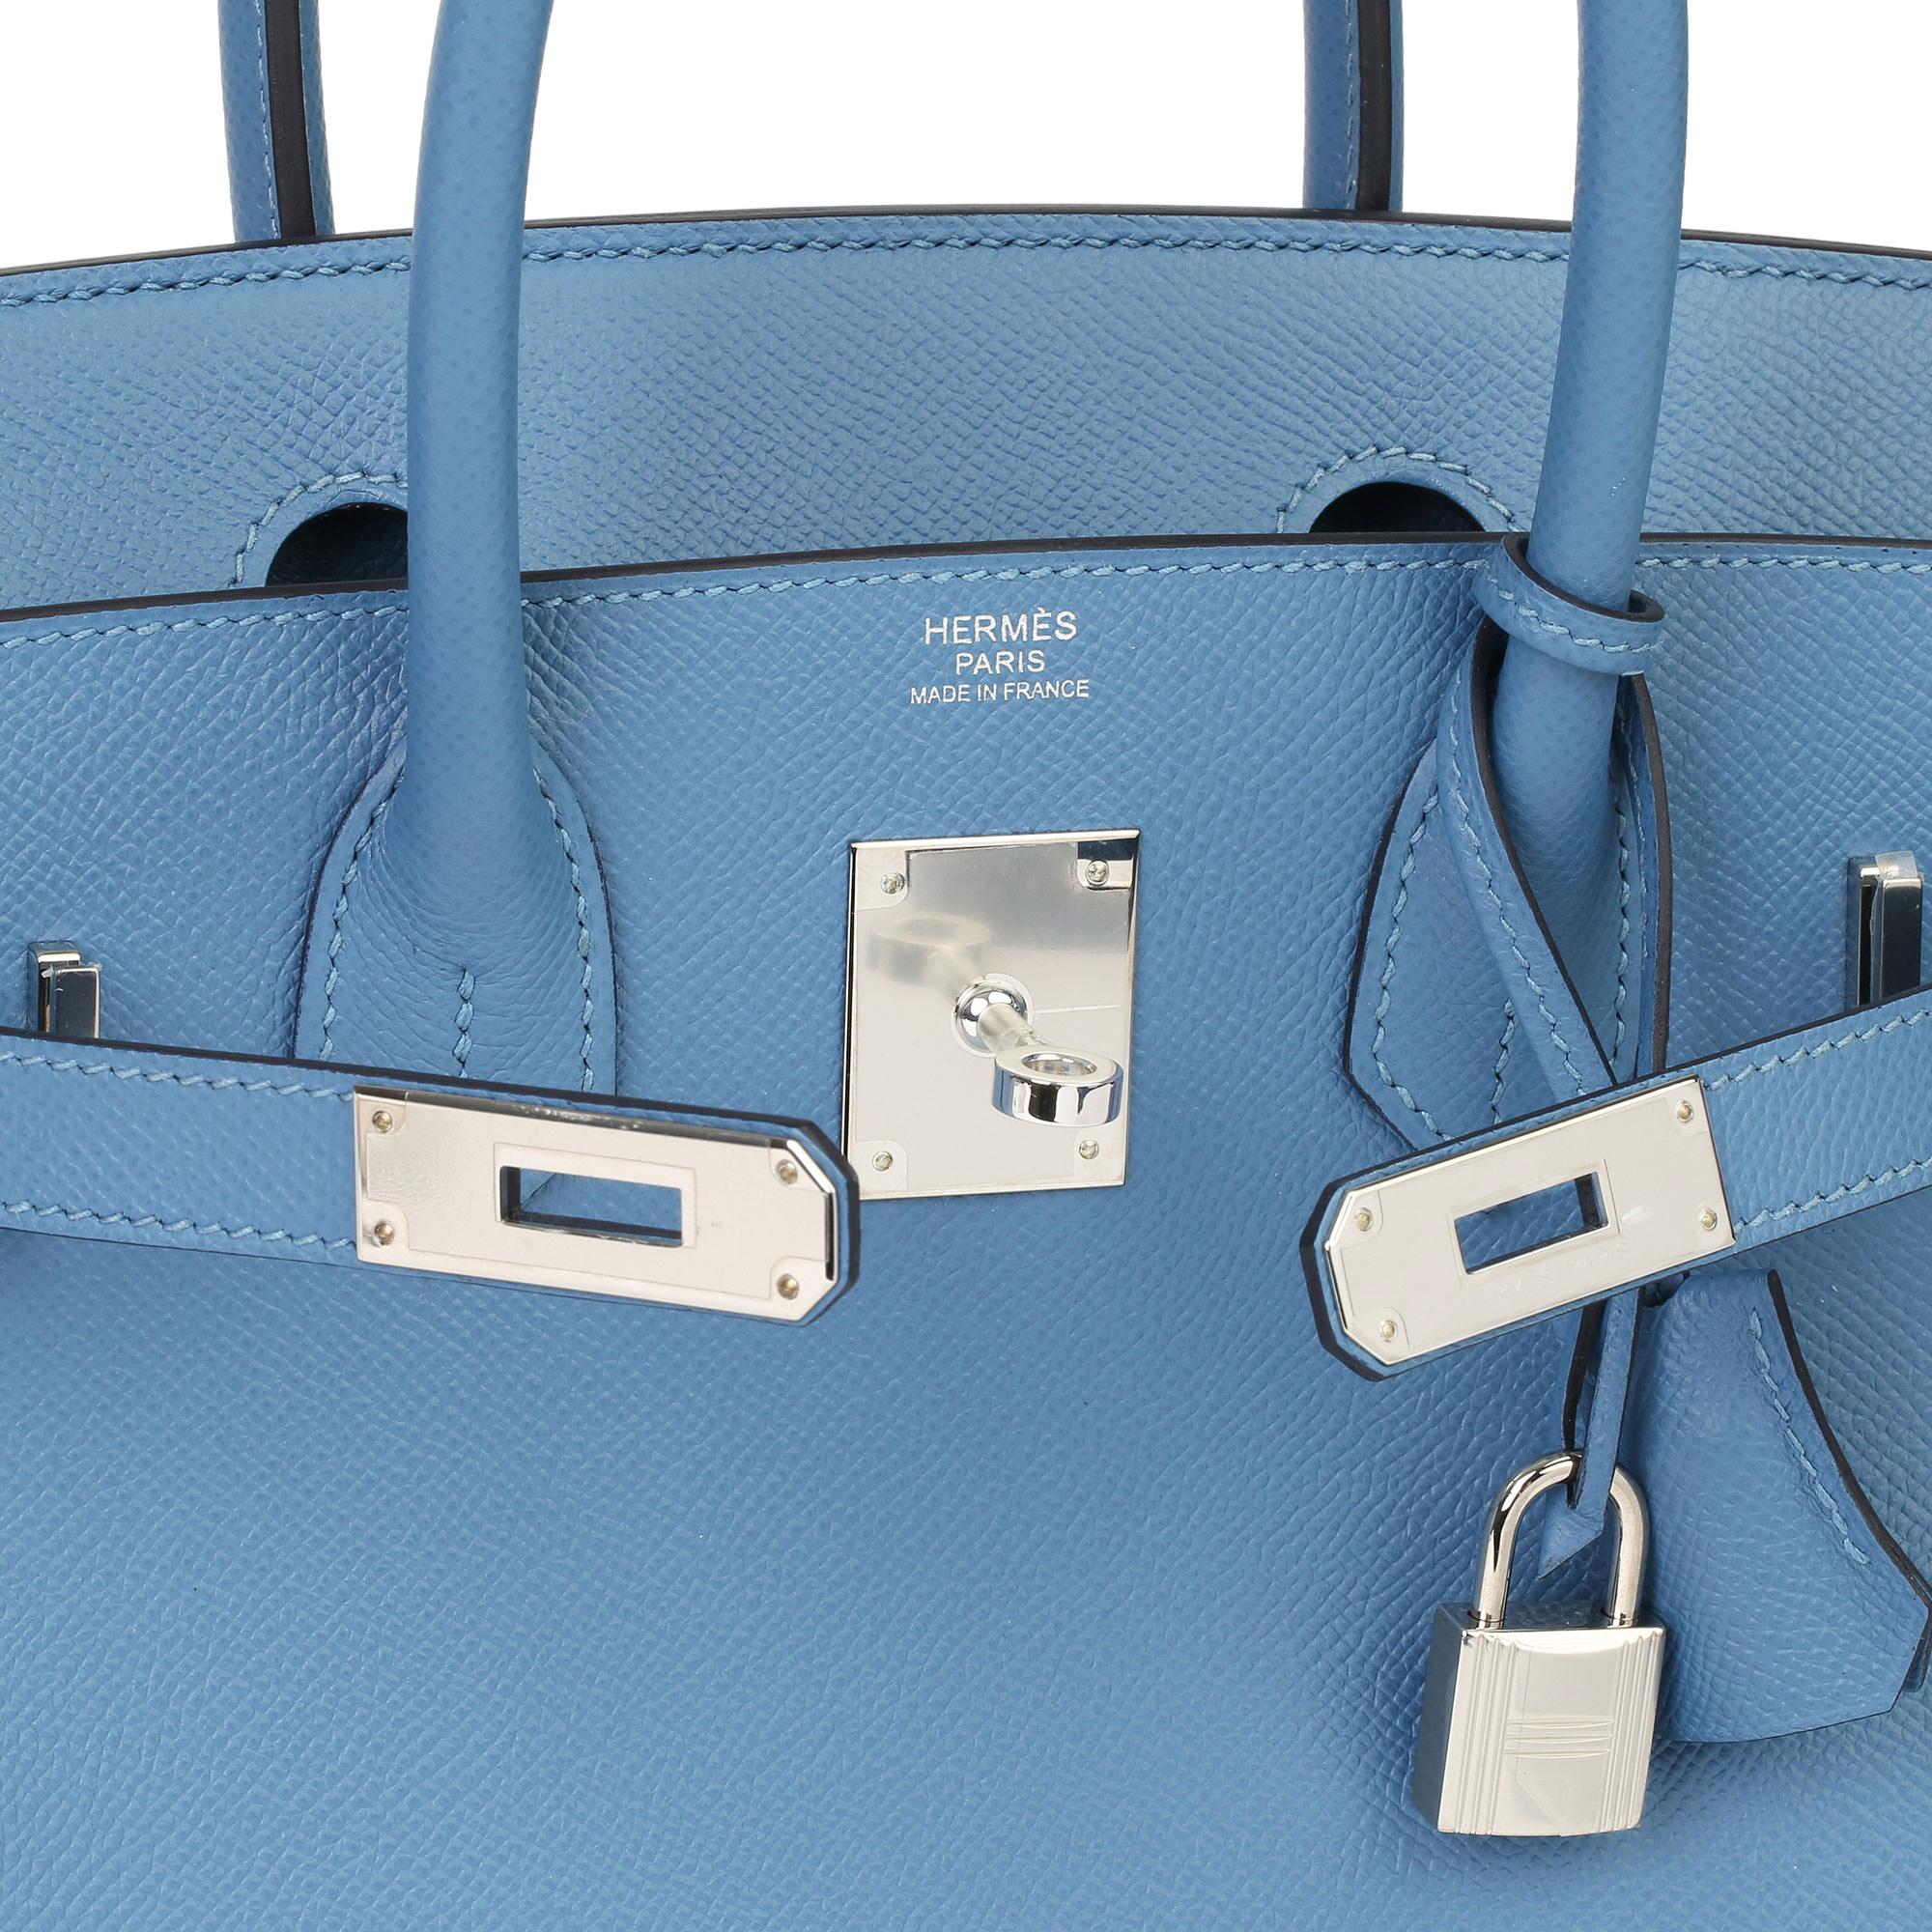 HERMÈS
Blue Azure Epsom Leather Birkin 30cm

Xupes Reference: HB3980
Serial Number: C
Age (Circa): 2018
Accompanied By: Hermès Dust Bag, Care Booklet, Protective Felt, Padlock, Keys, Clochette, Rain Cover
Authenticity Details: Serial Sticker (Made